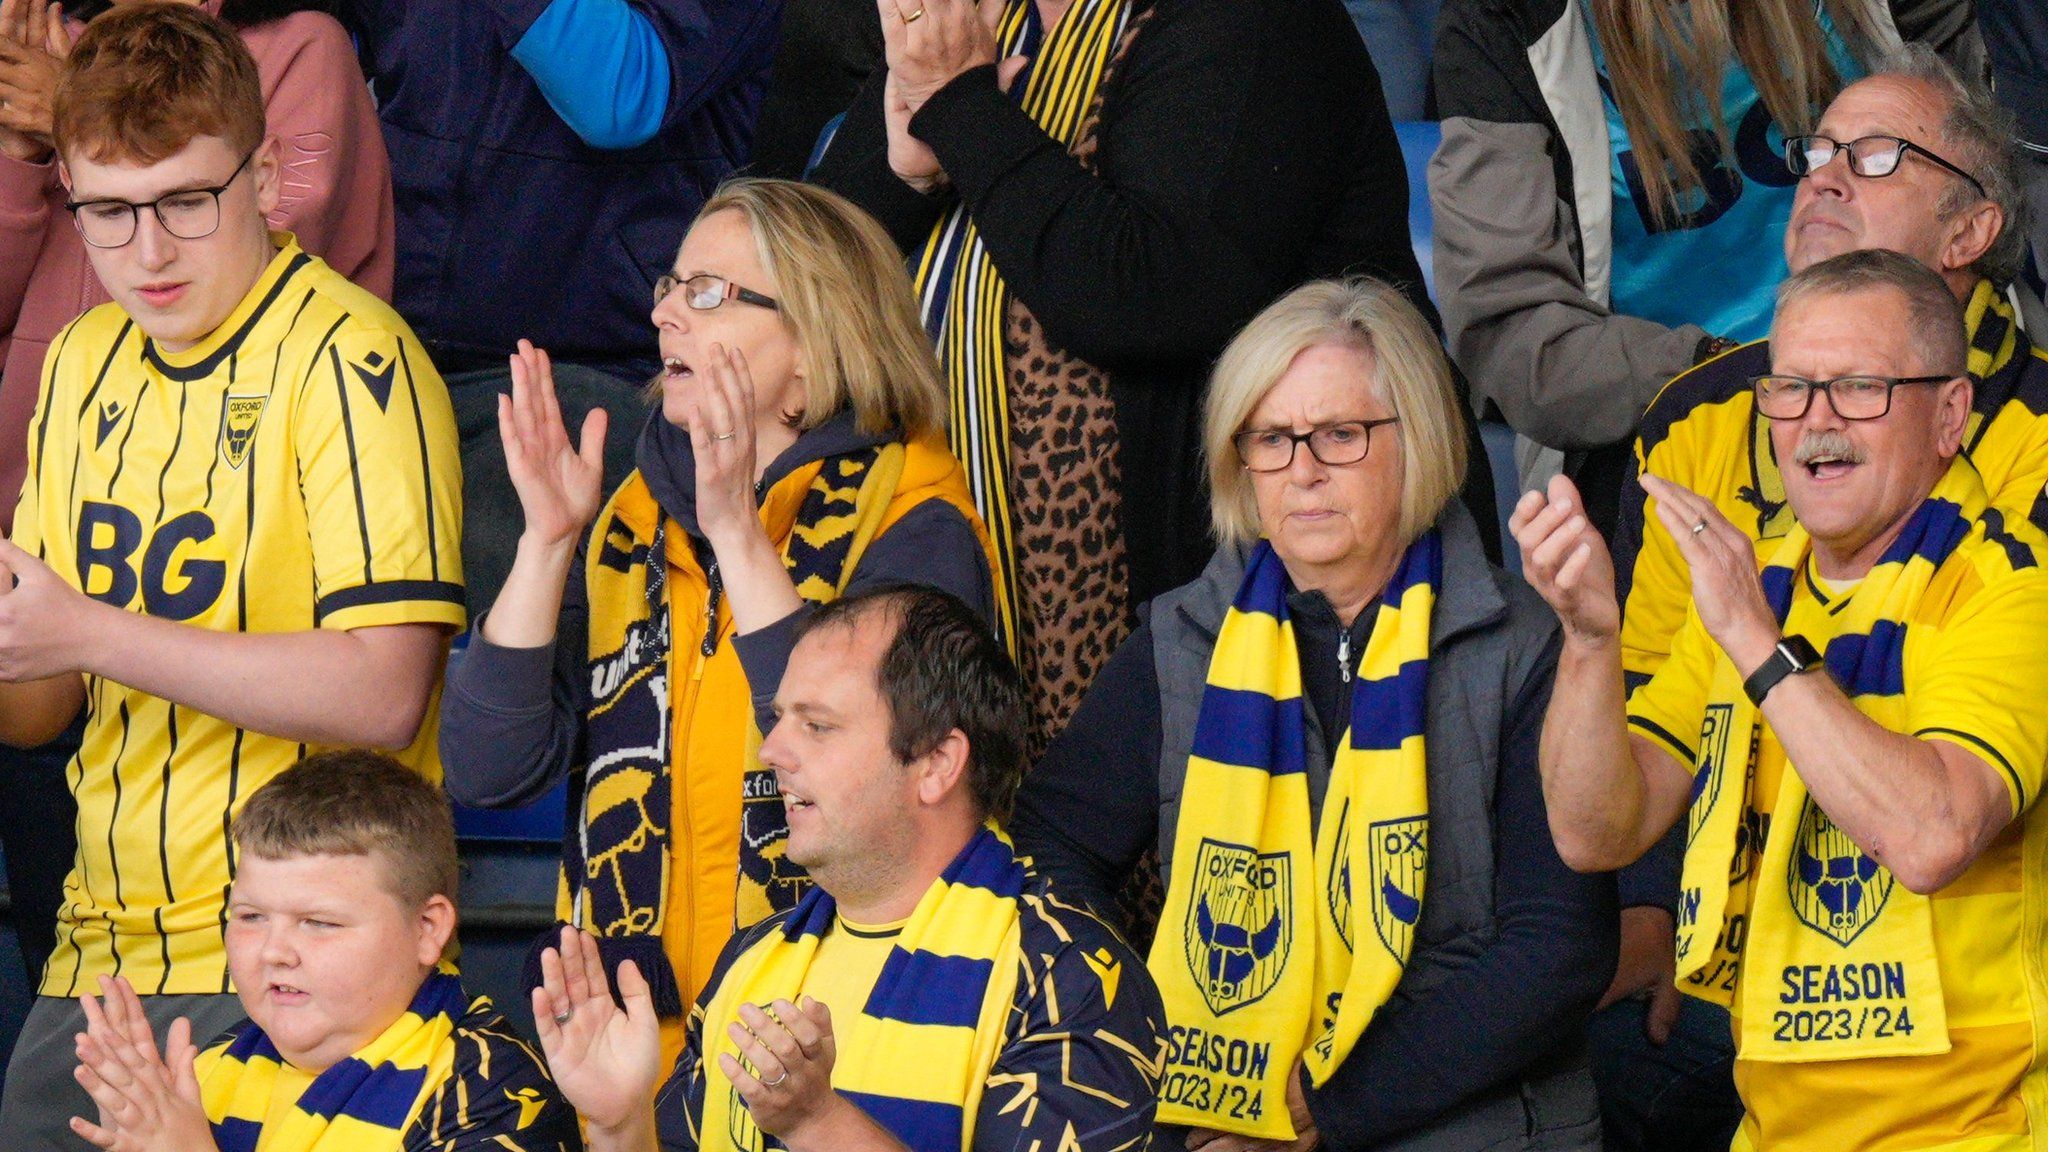 Oxford United fans celebrate in the stands at the Kassam Stadium.